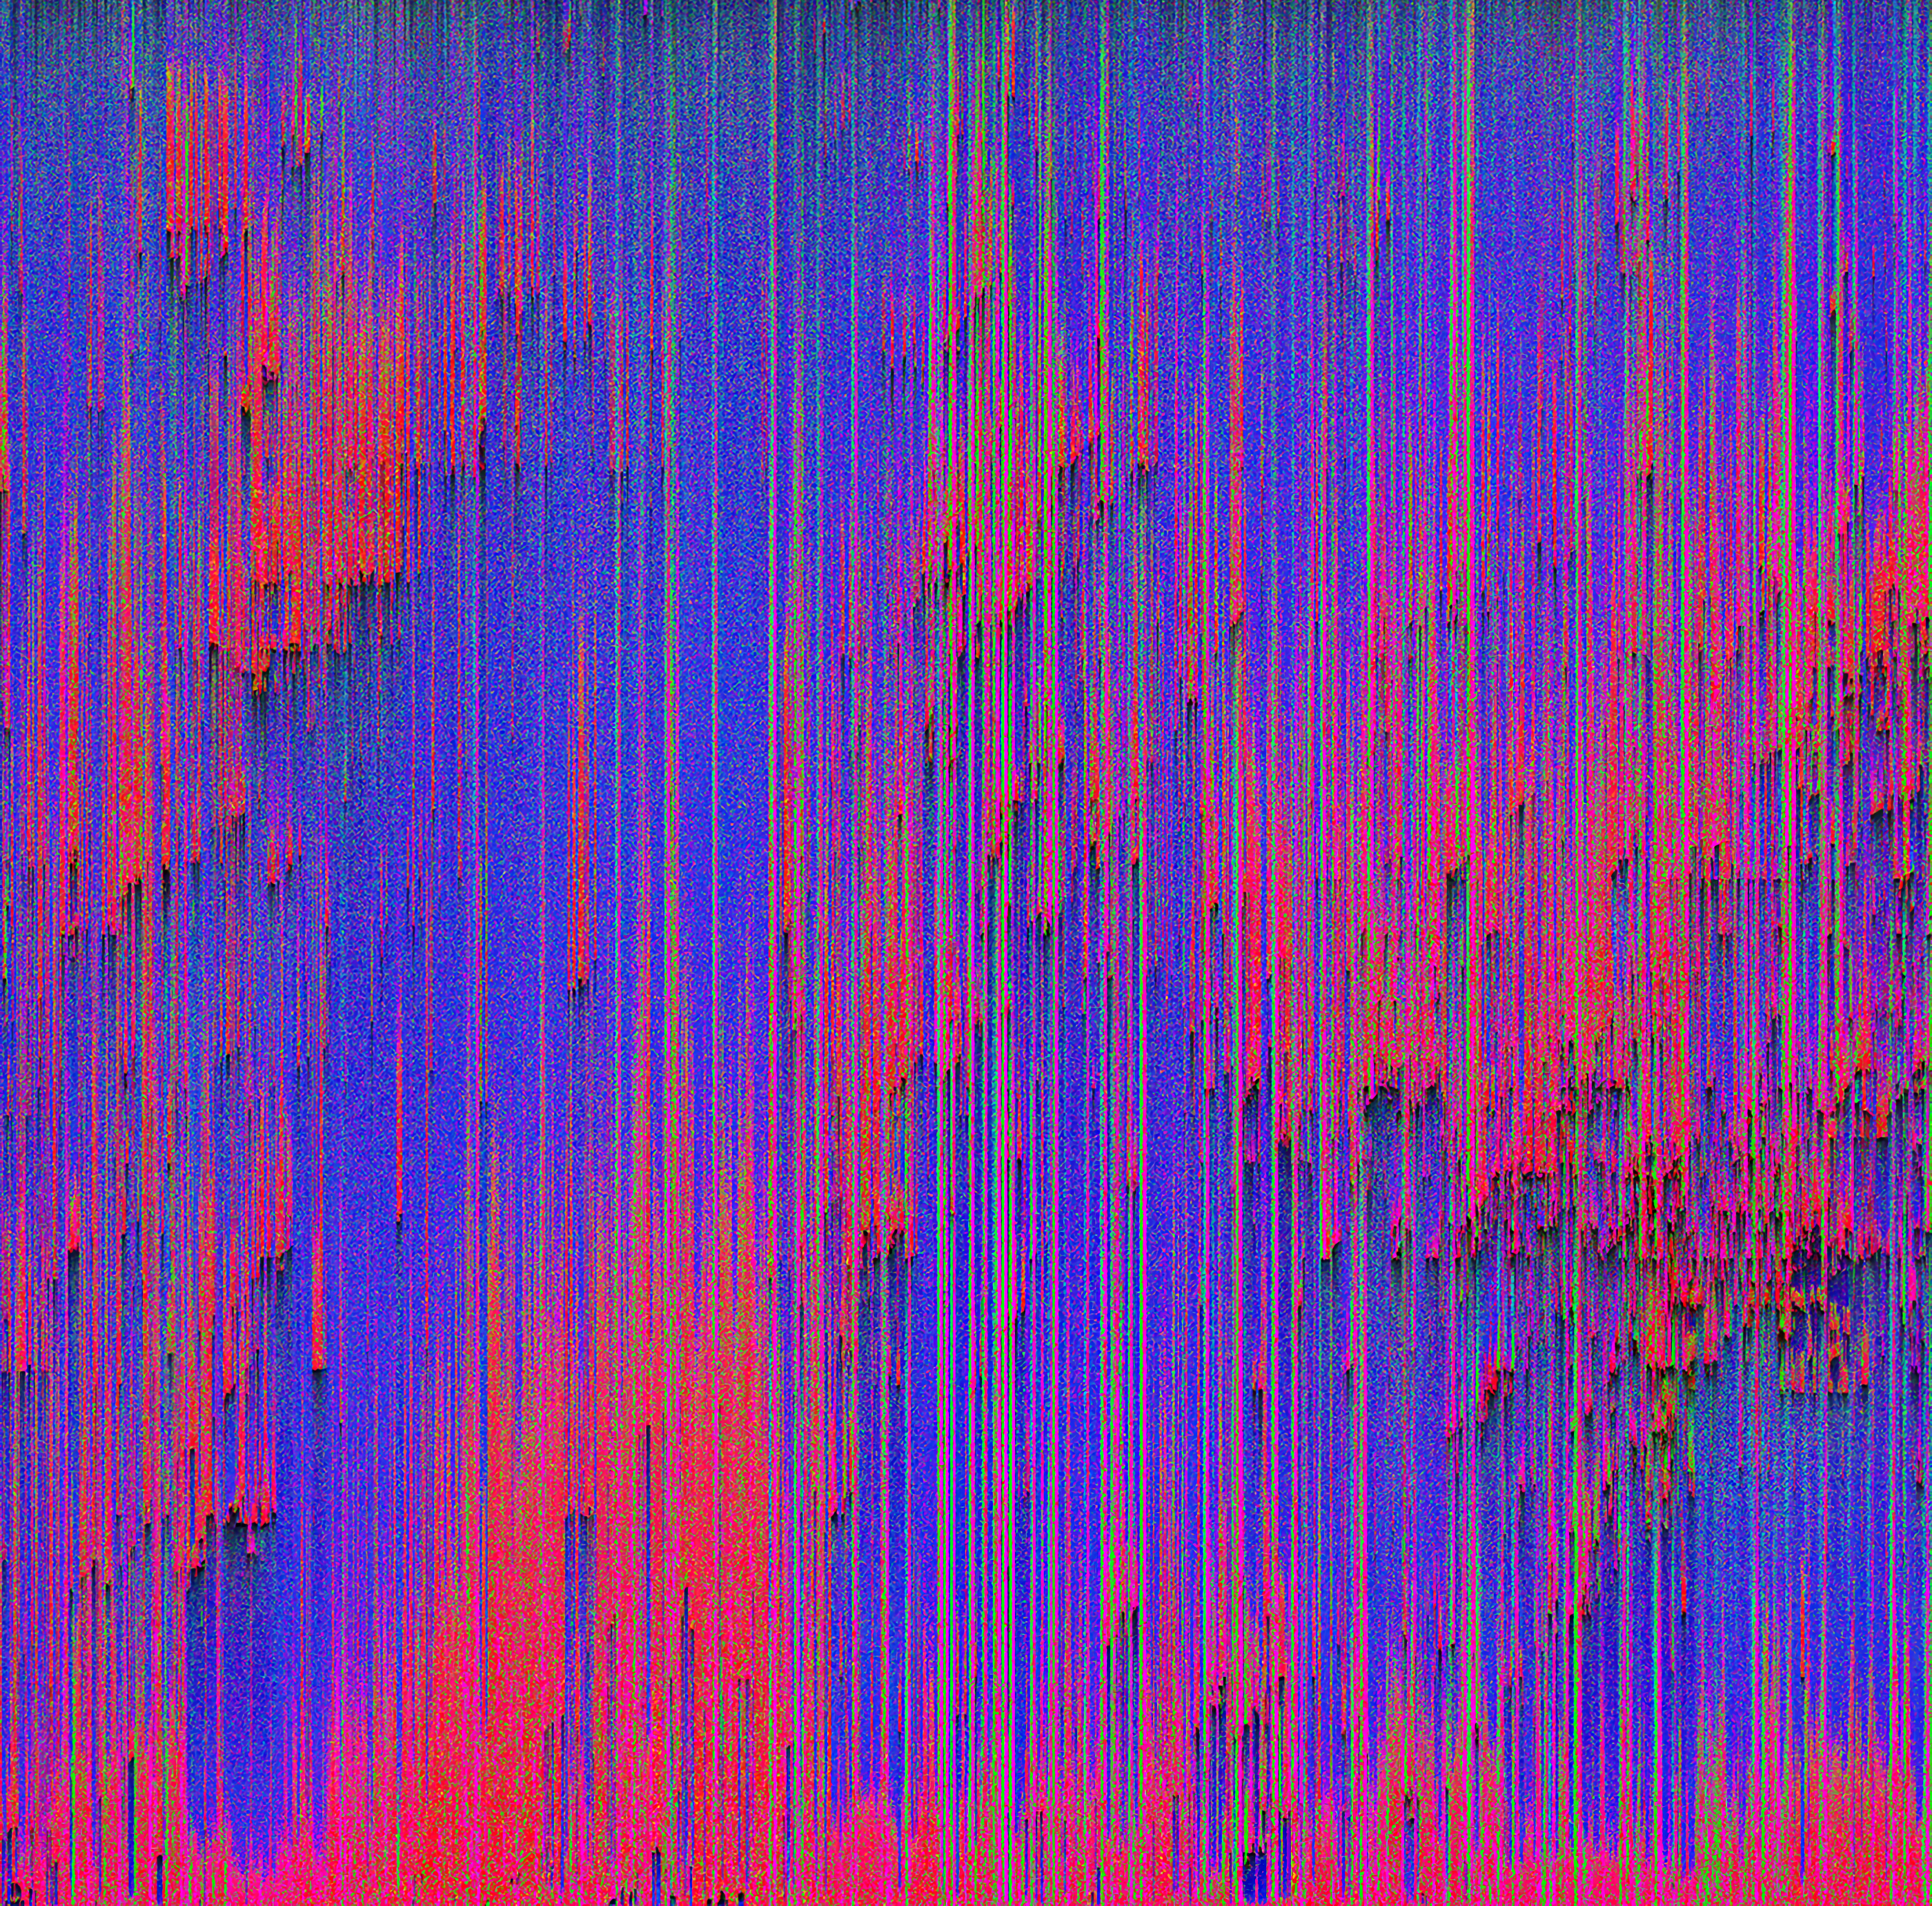 glitch, abstract, lines, distortion, interference